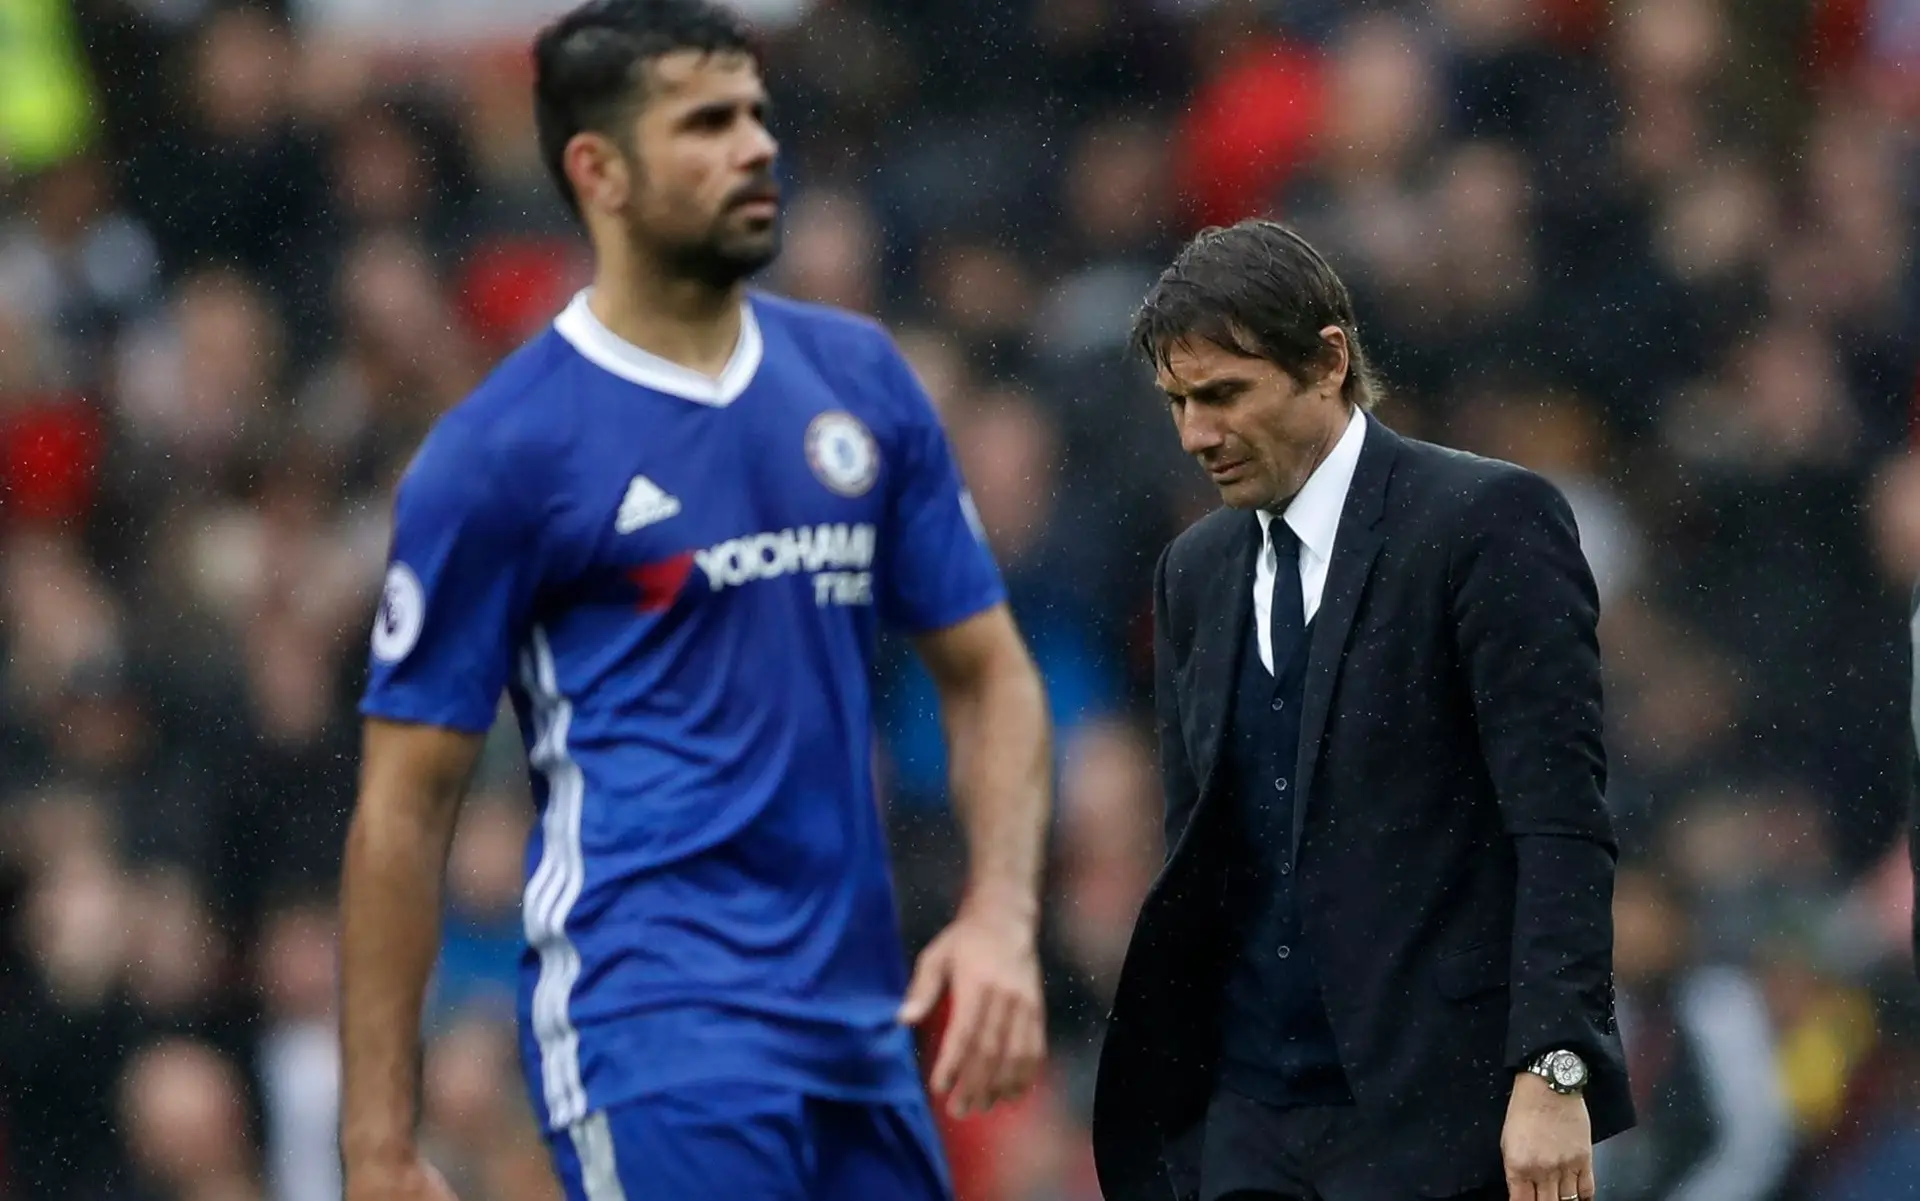 Conte: 'I prefer to keep good memories about Costa but we know the truth'